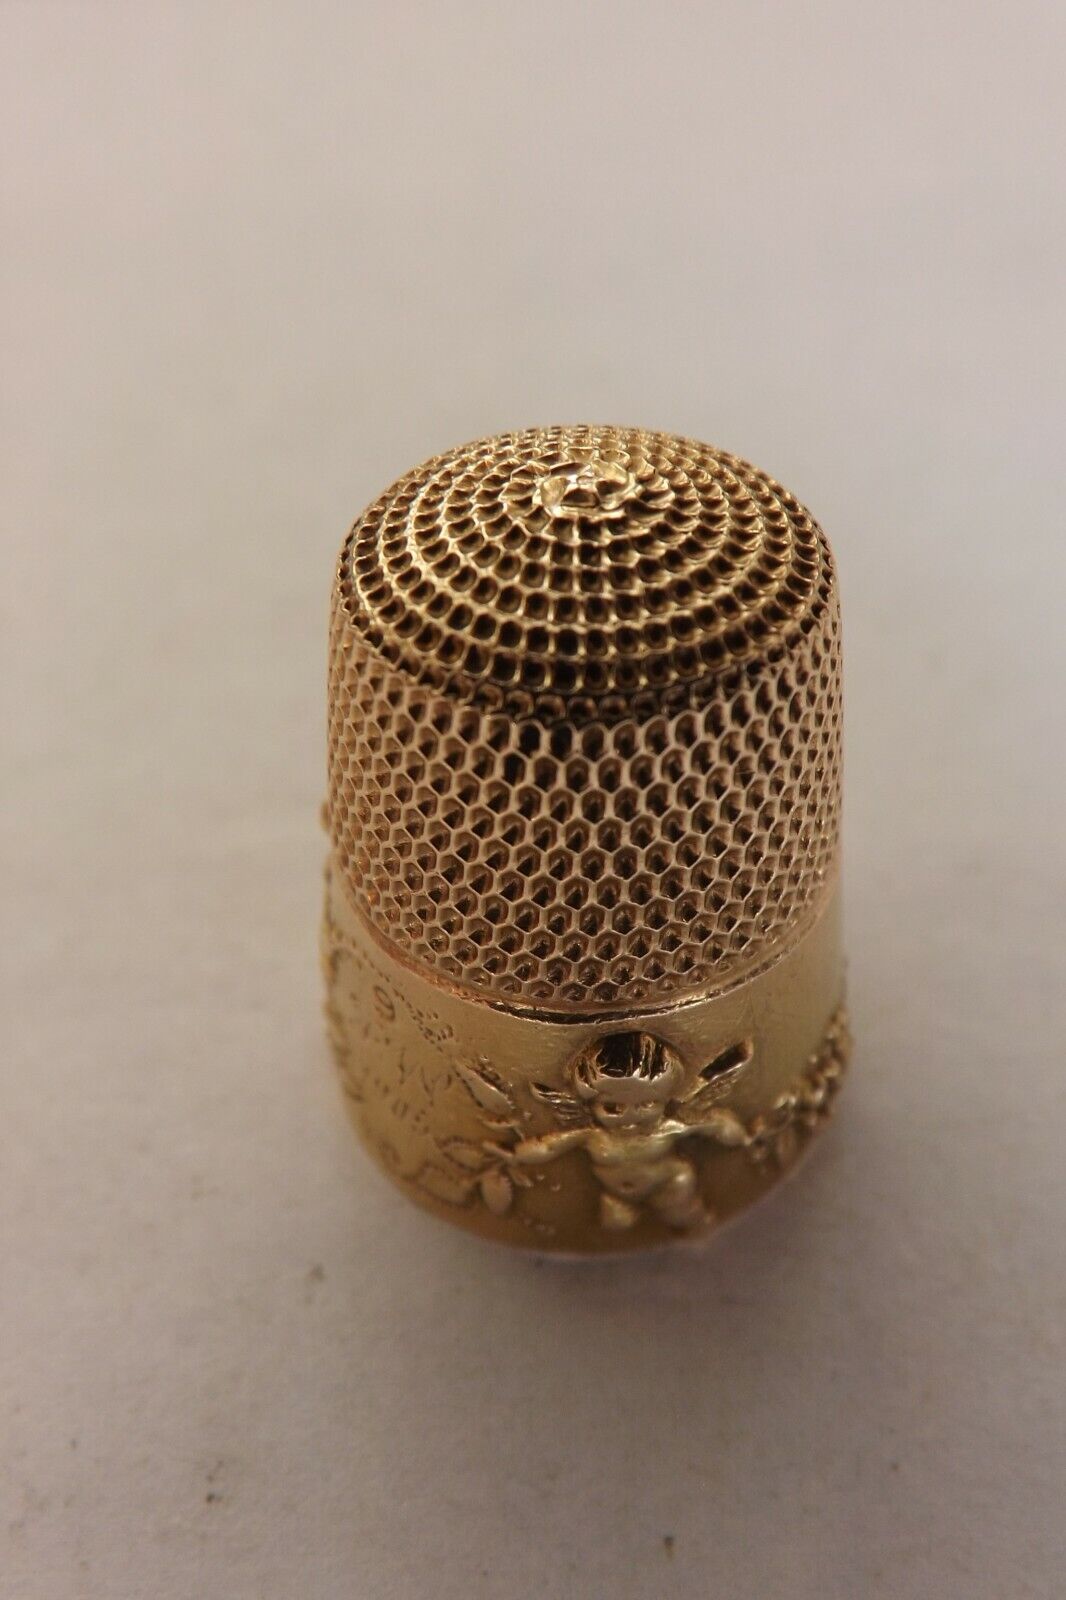 ANTIQUE ENGLISH 9CT GOLD THIMBLE DANCING CUPIDS BY SIMON BROS 1905  (2251)